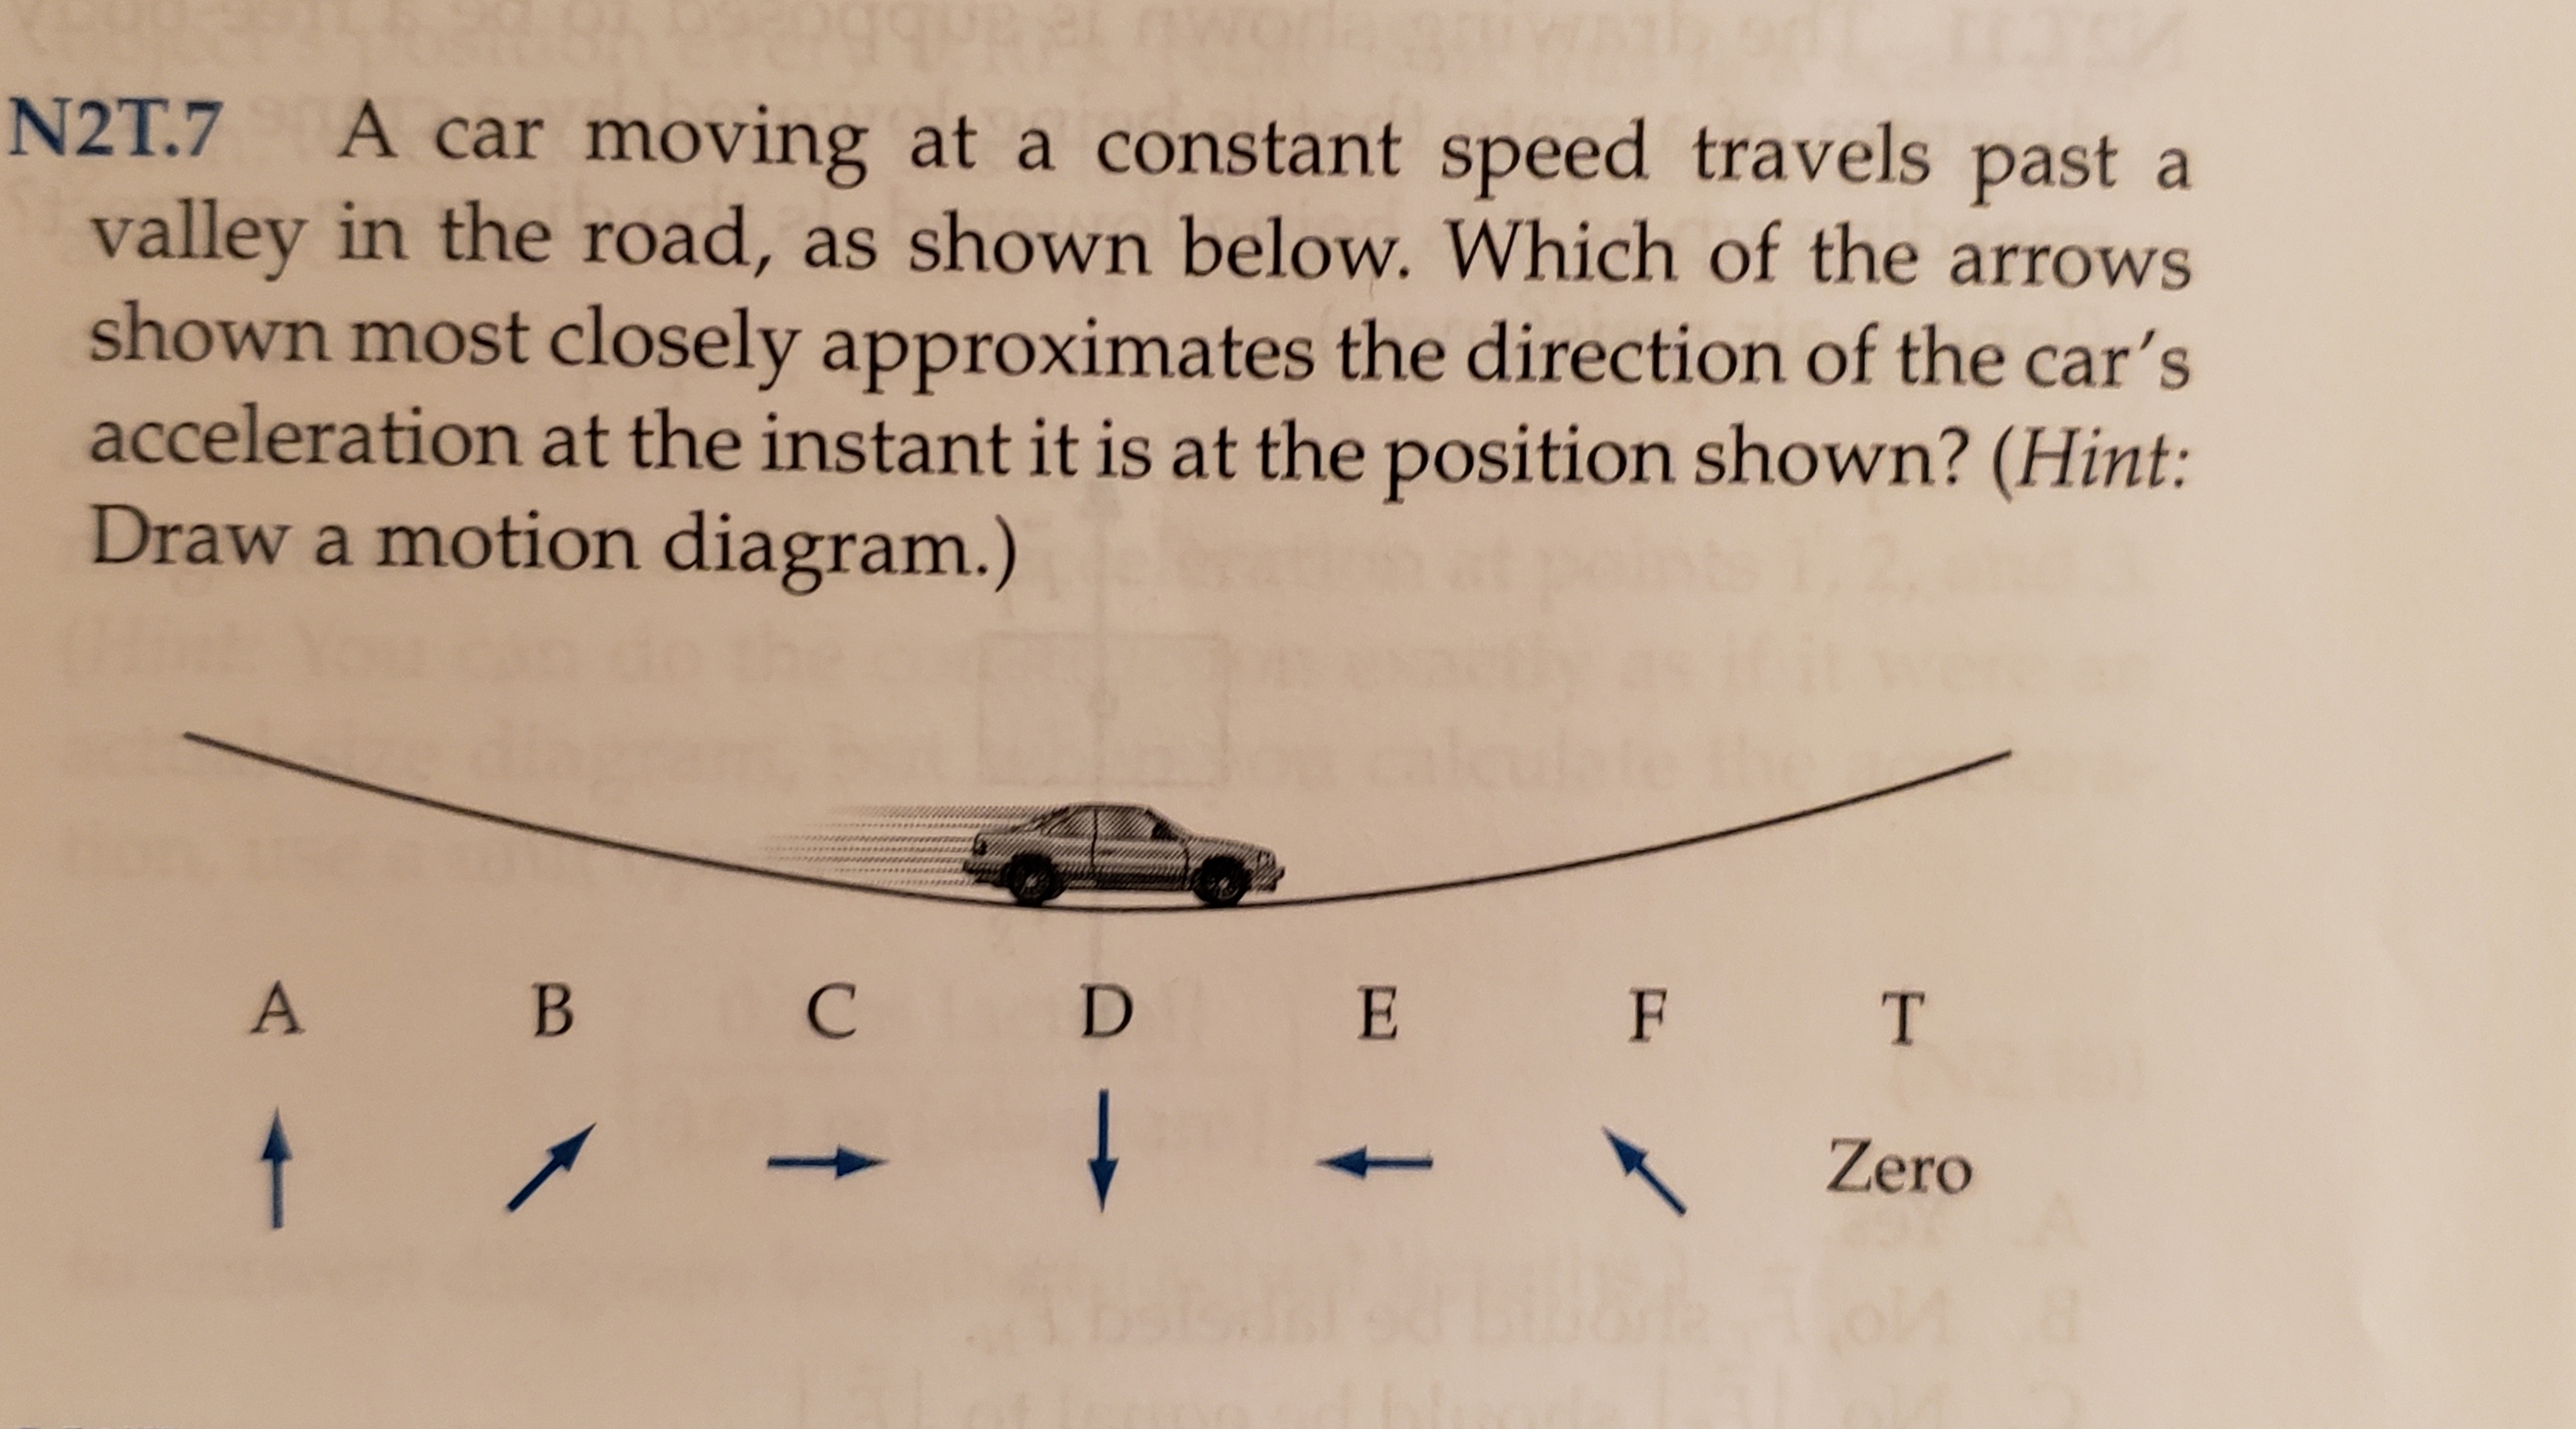 N2T.7 A car moving at a constant speed travels past a
valley in the road, as shown below. Which of the arrows
shown most closely approximates the direction of the car's
acceleration at the instant it is at the position shown? (Hint:
Draw a motion diagram.)
С
В
E
F
T
Zero
